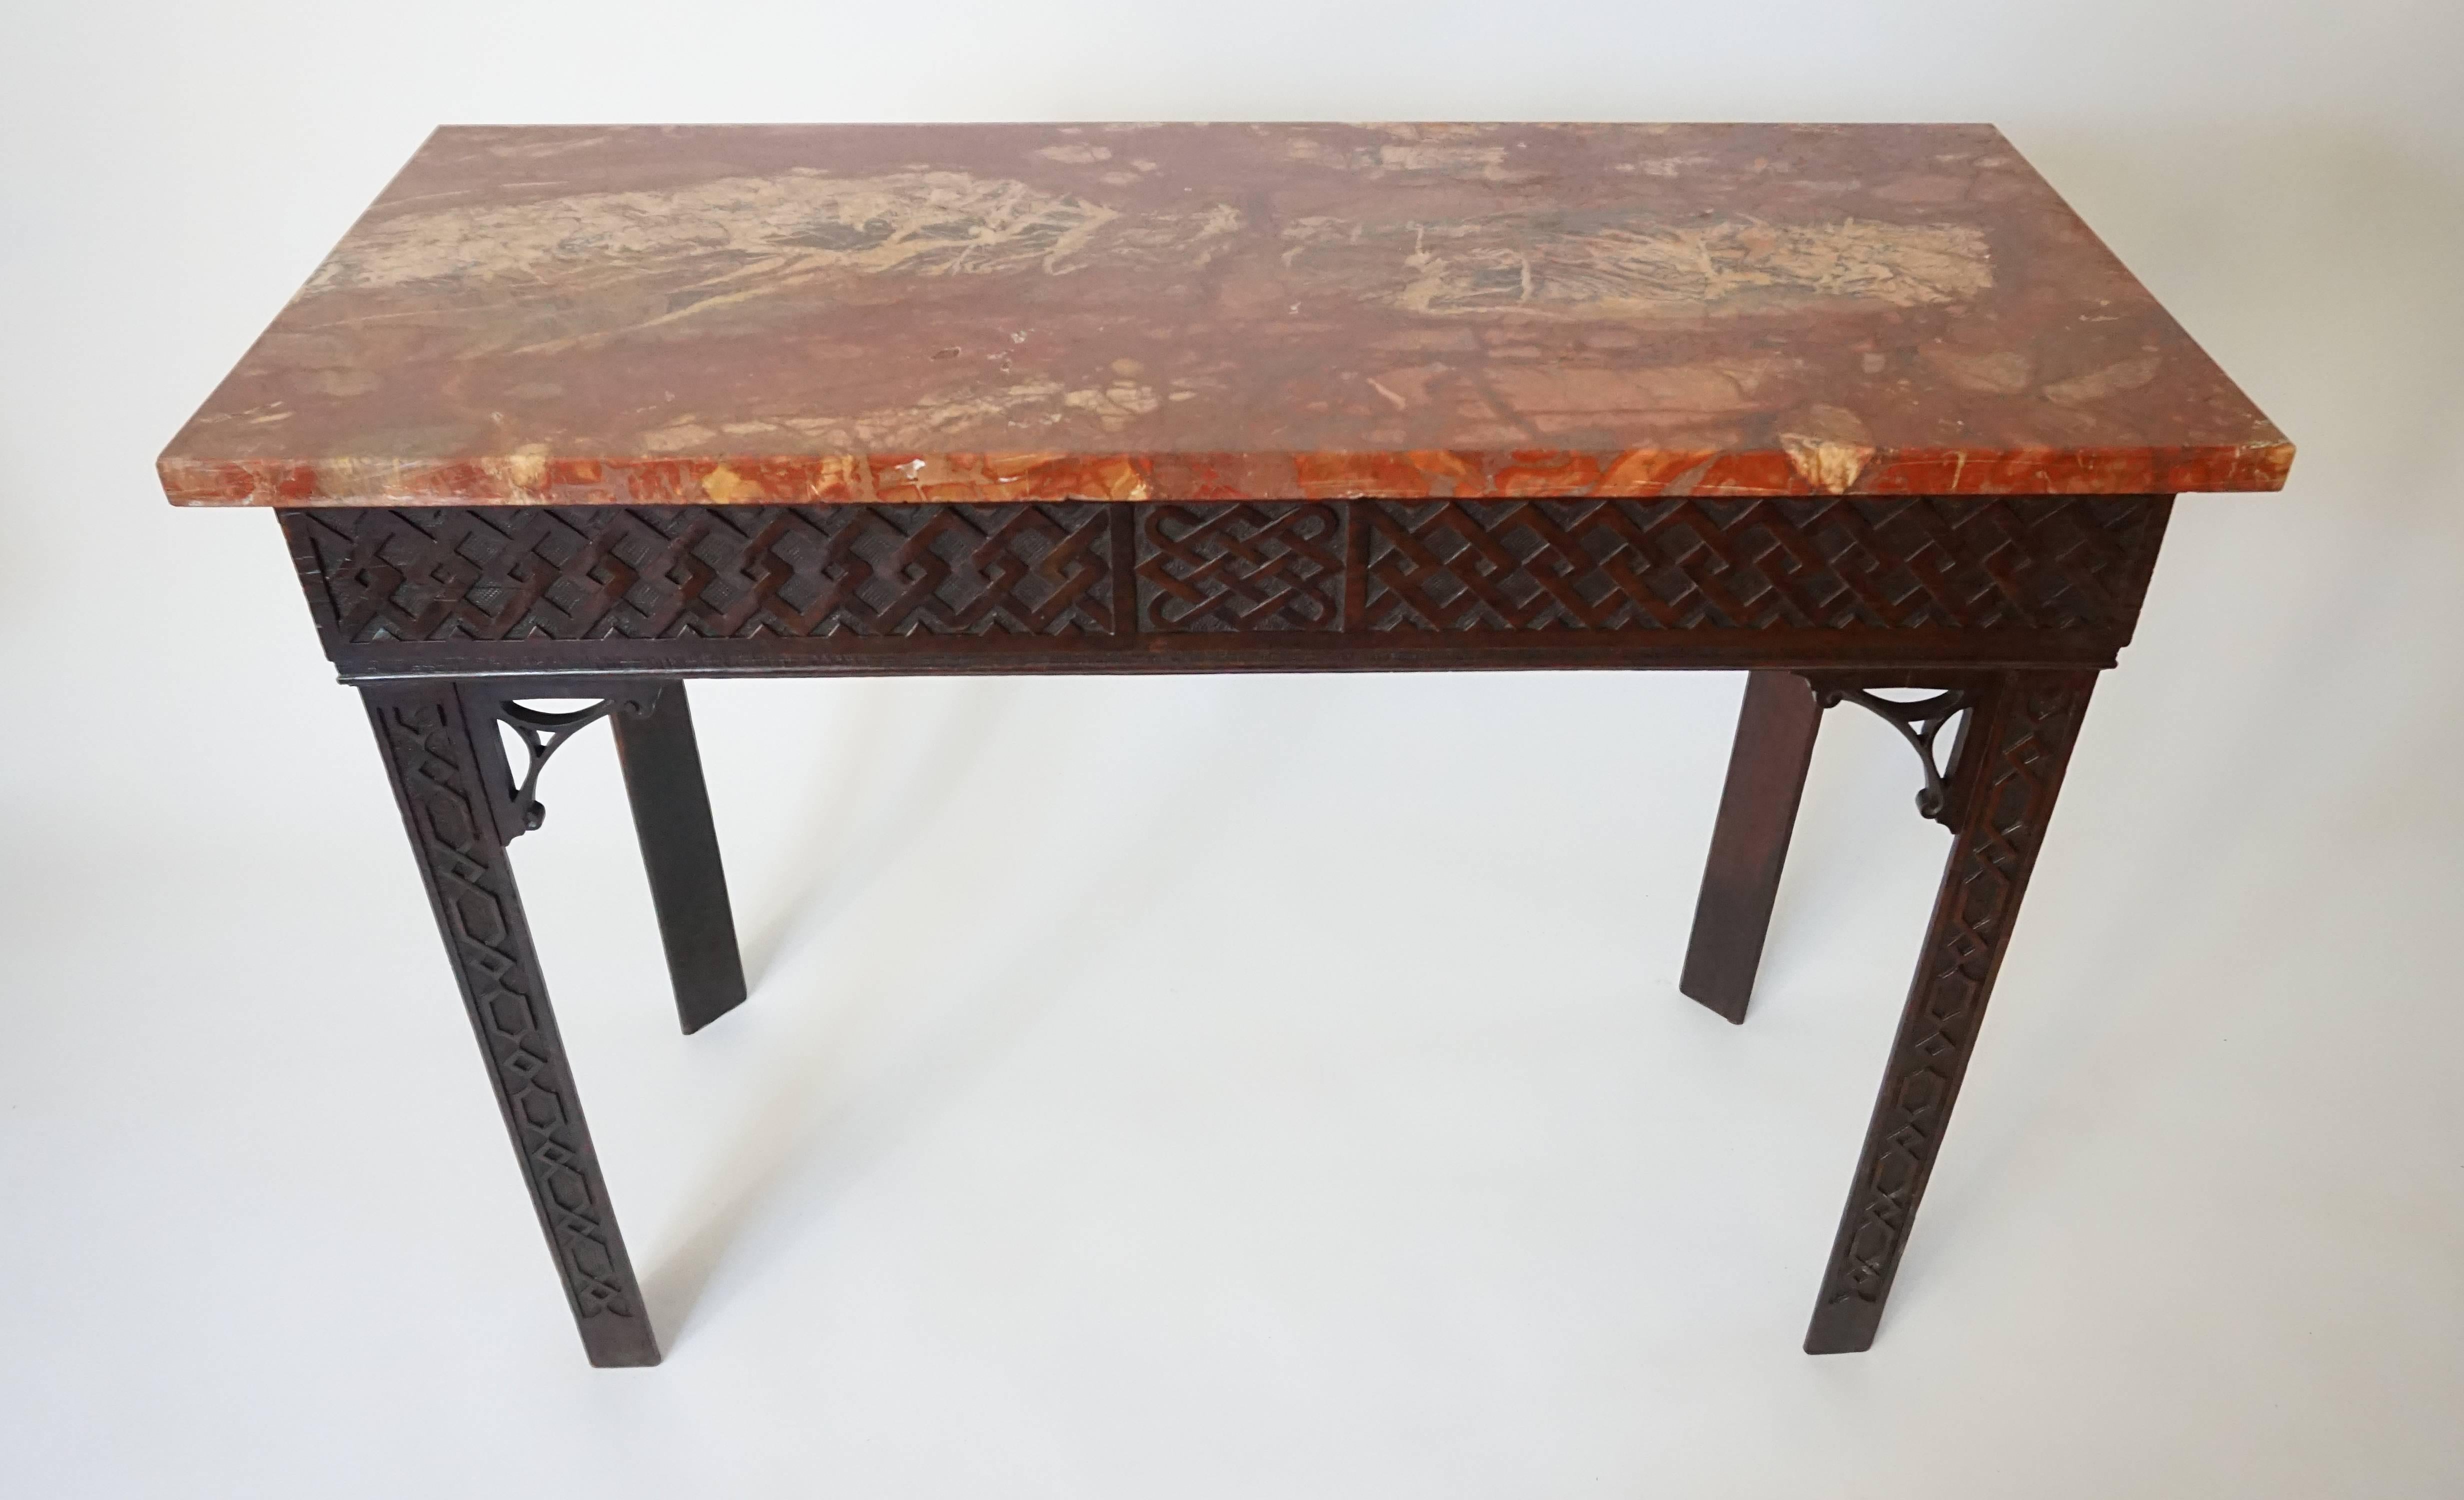 Exceptional circa 1760 Irish Chippendale mahogany slab or side table having breccia pernice marble top surmounting carved geometric interlacement band frieze with central carved 'celtic knot' reserve on triangular geometric chain carved legs with